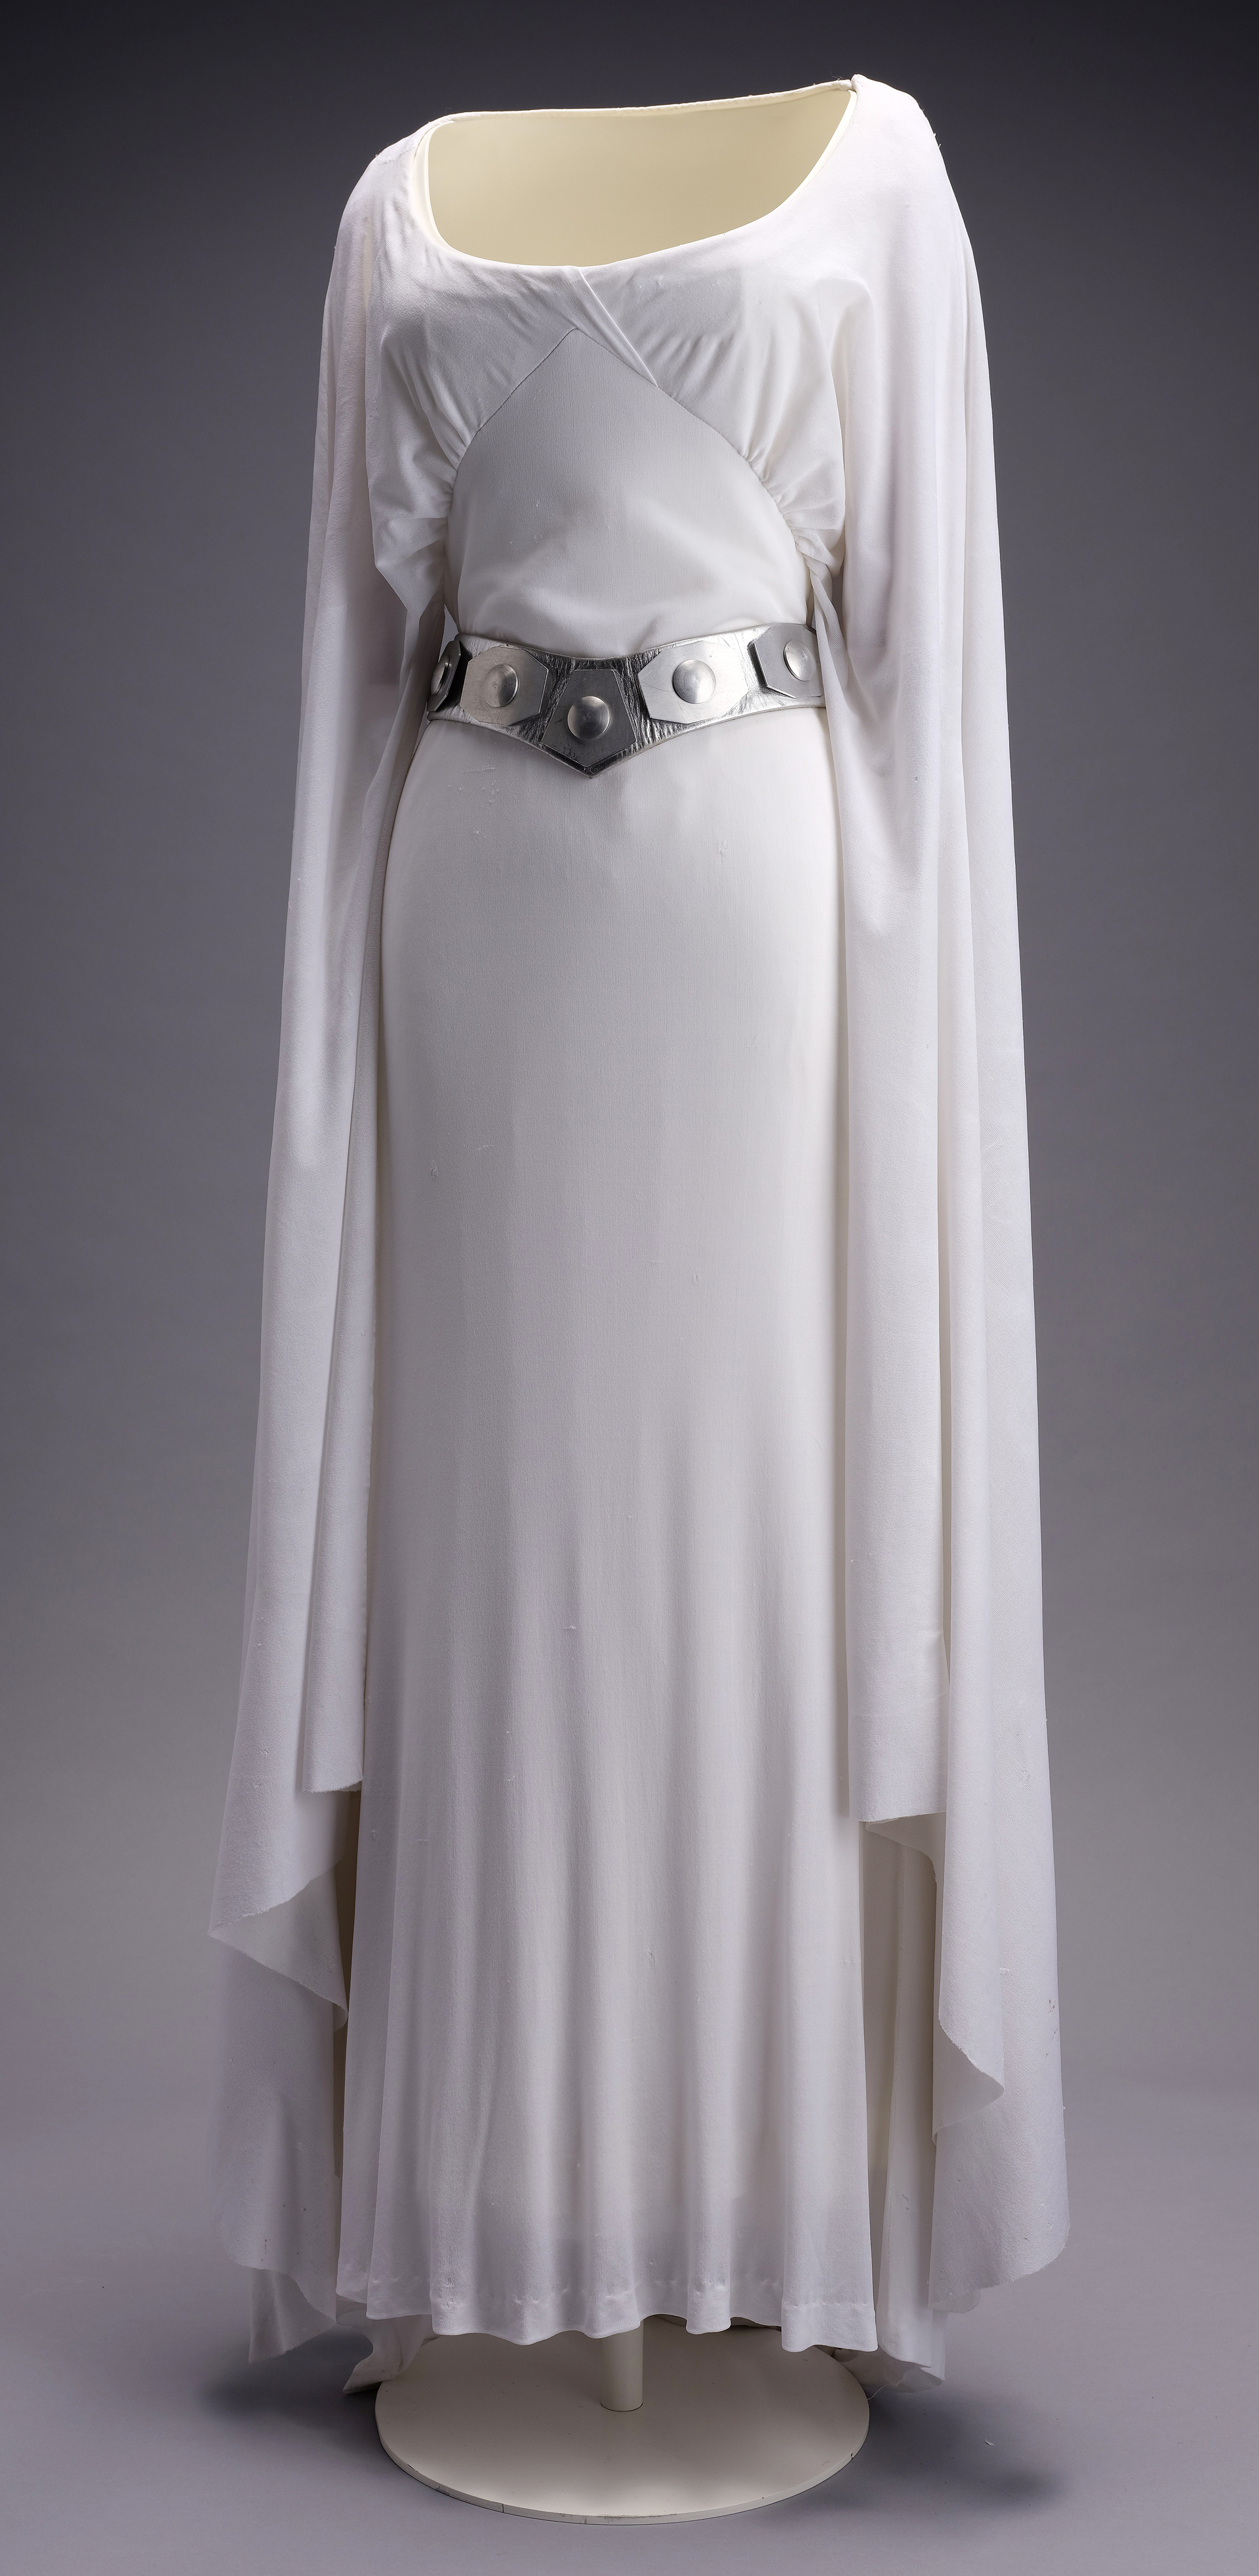 STAR WARS: A NEW HOPE (1977) - Princess Leia's (Carrie Fisher) Screen-Matched Ceremonial Dress - Image 18 of 39